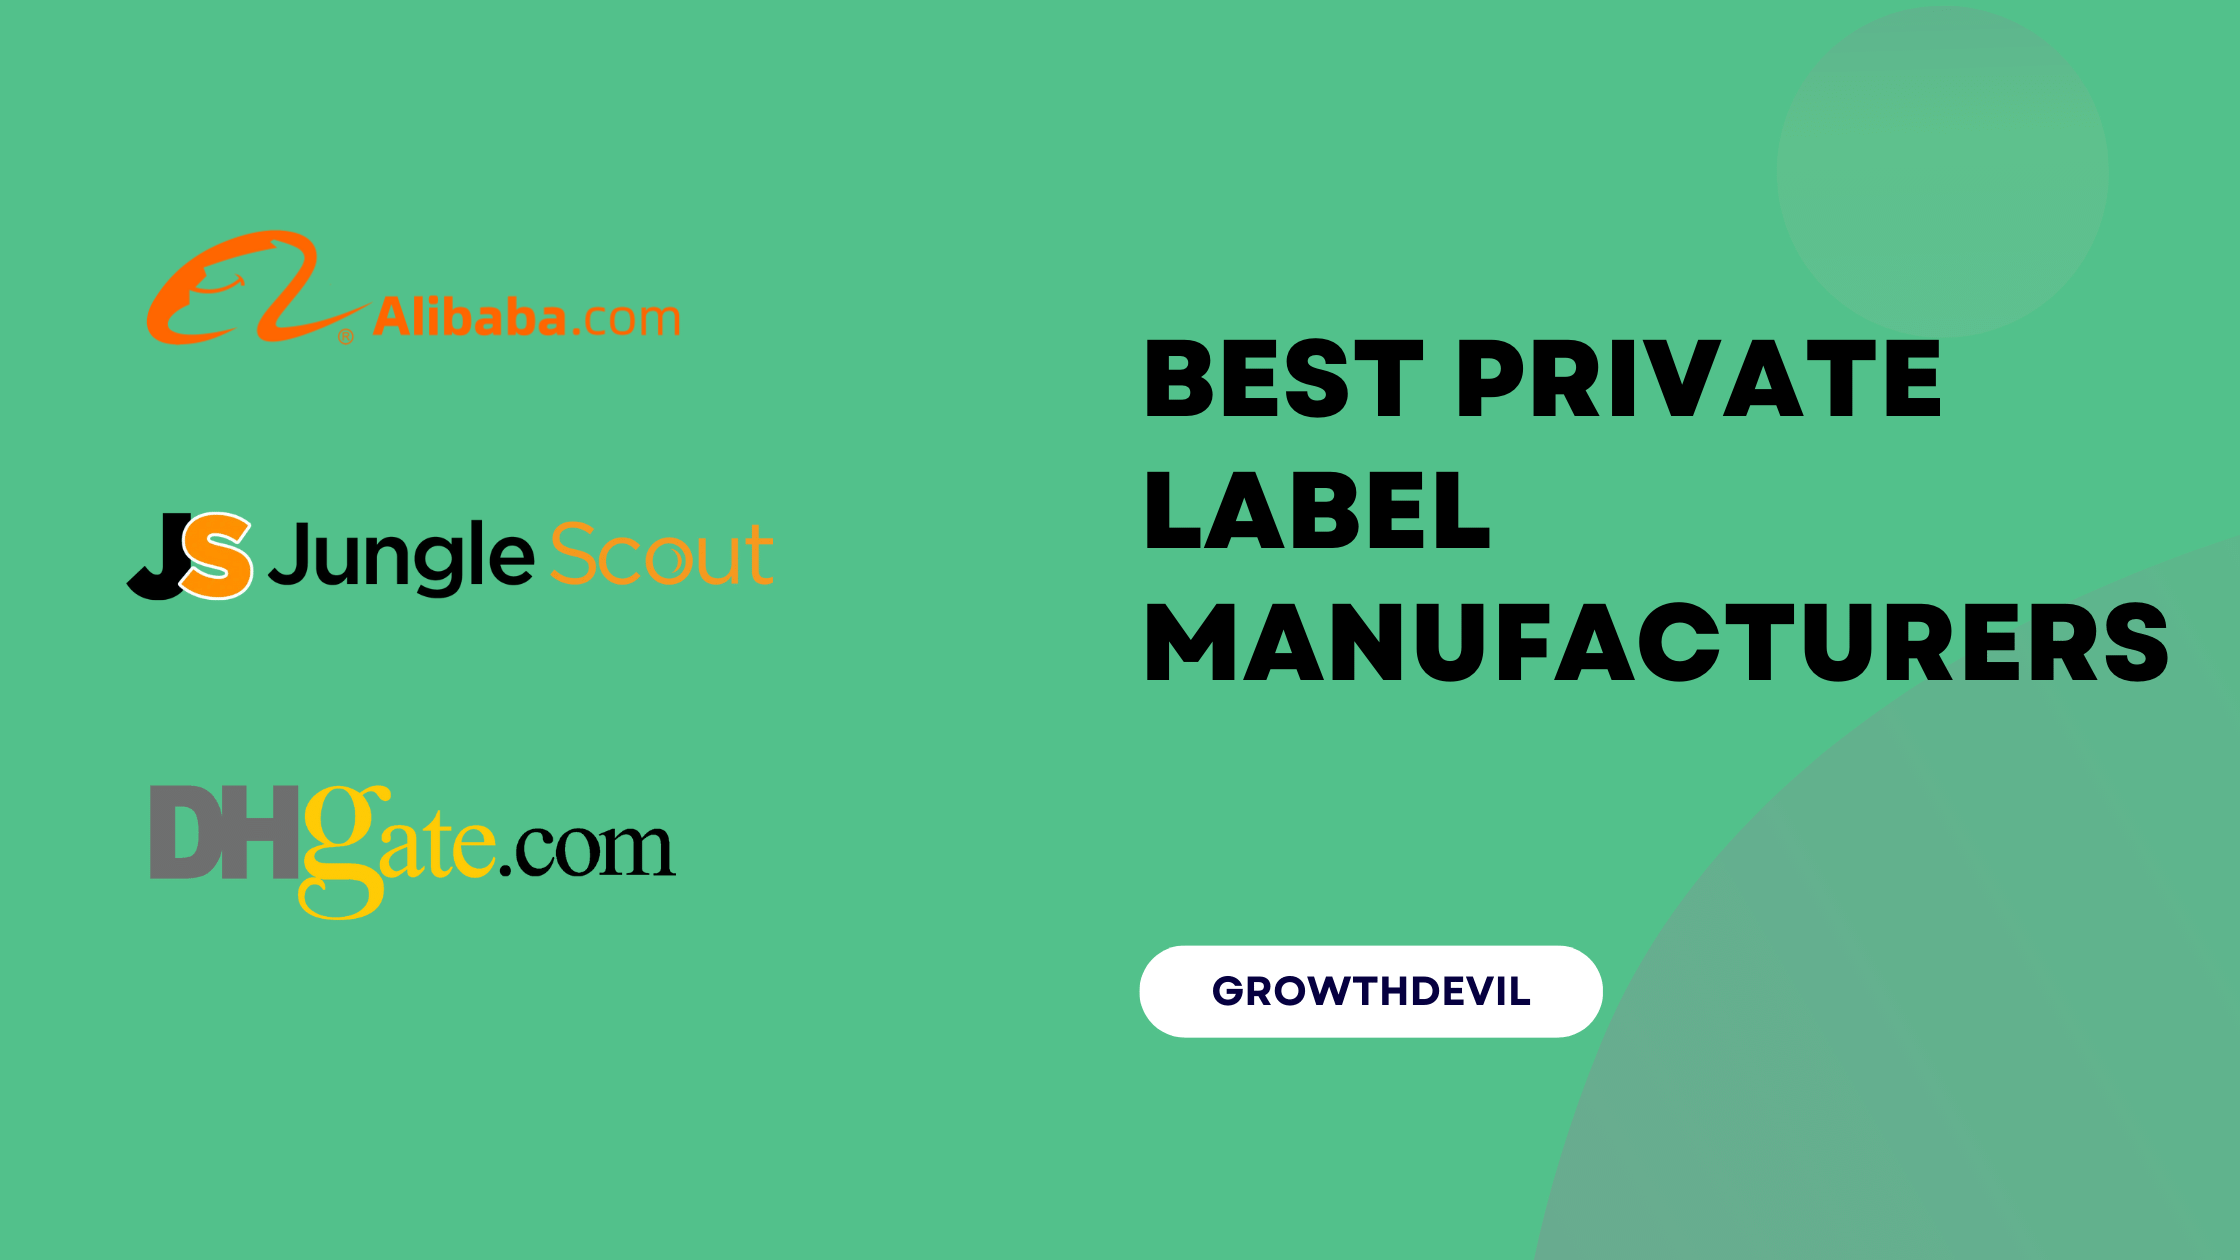 Best Private Label Manufacturers - GrowthDevil